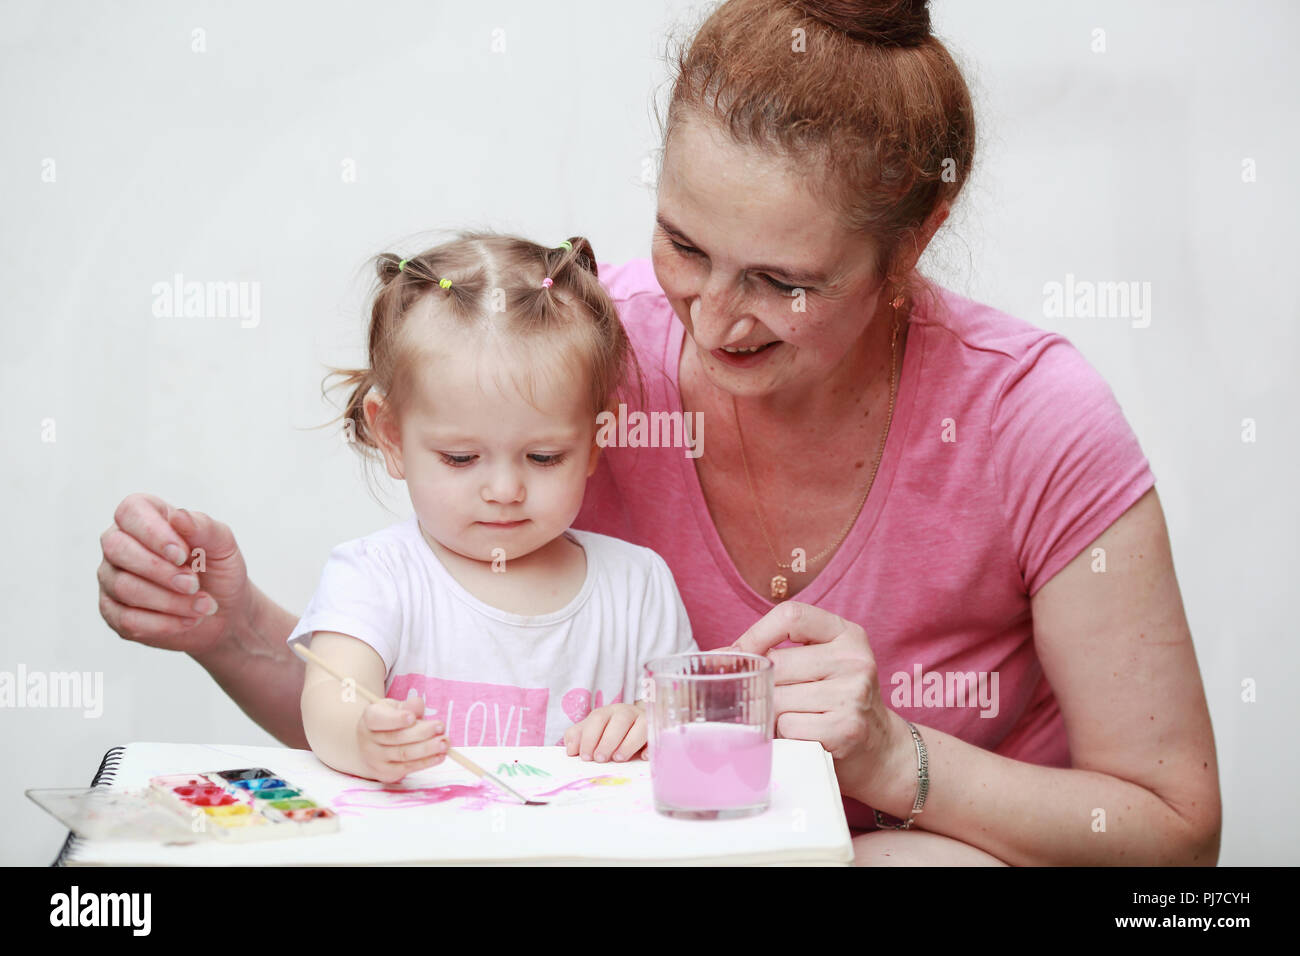 The girl is drawing Stock Photo